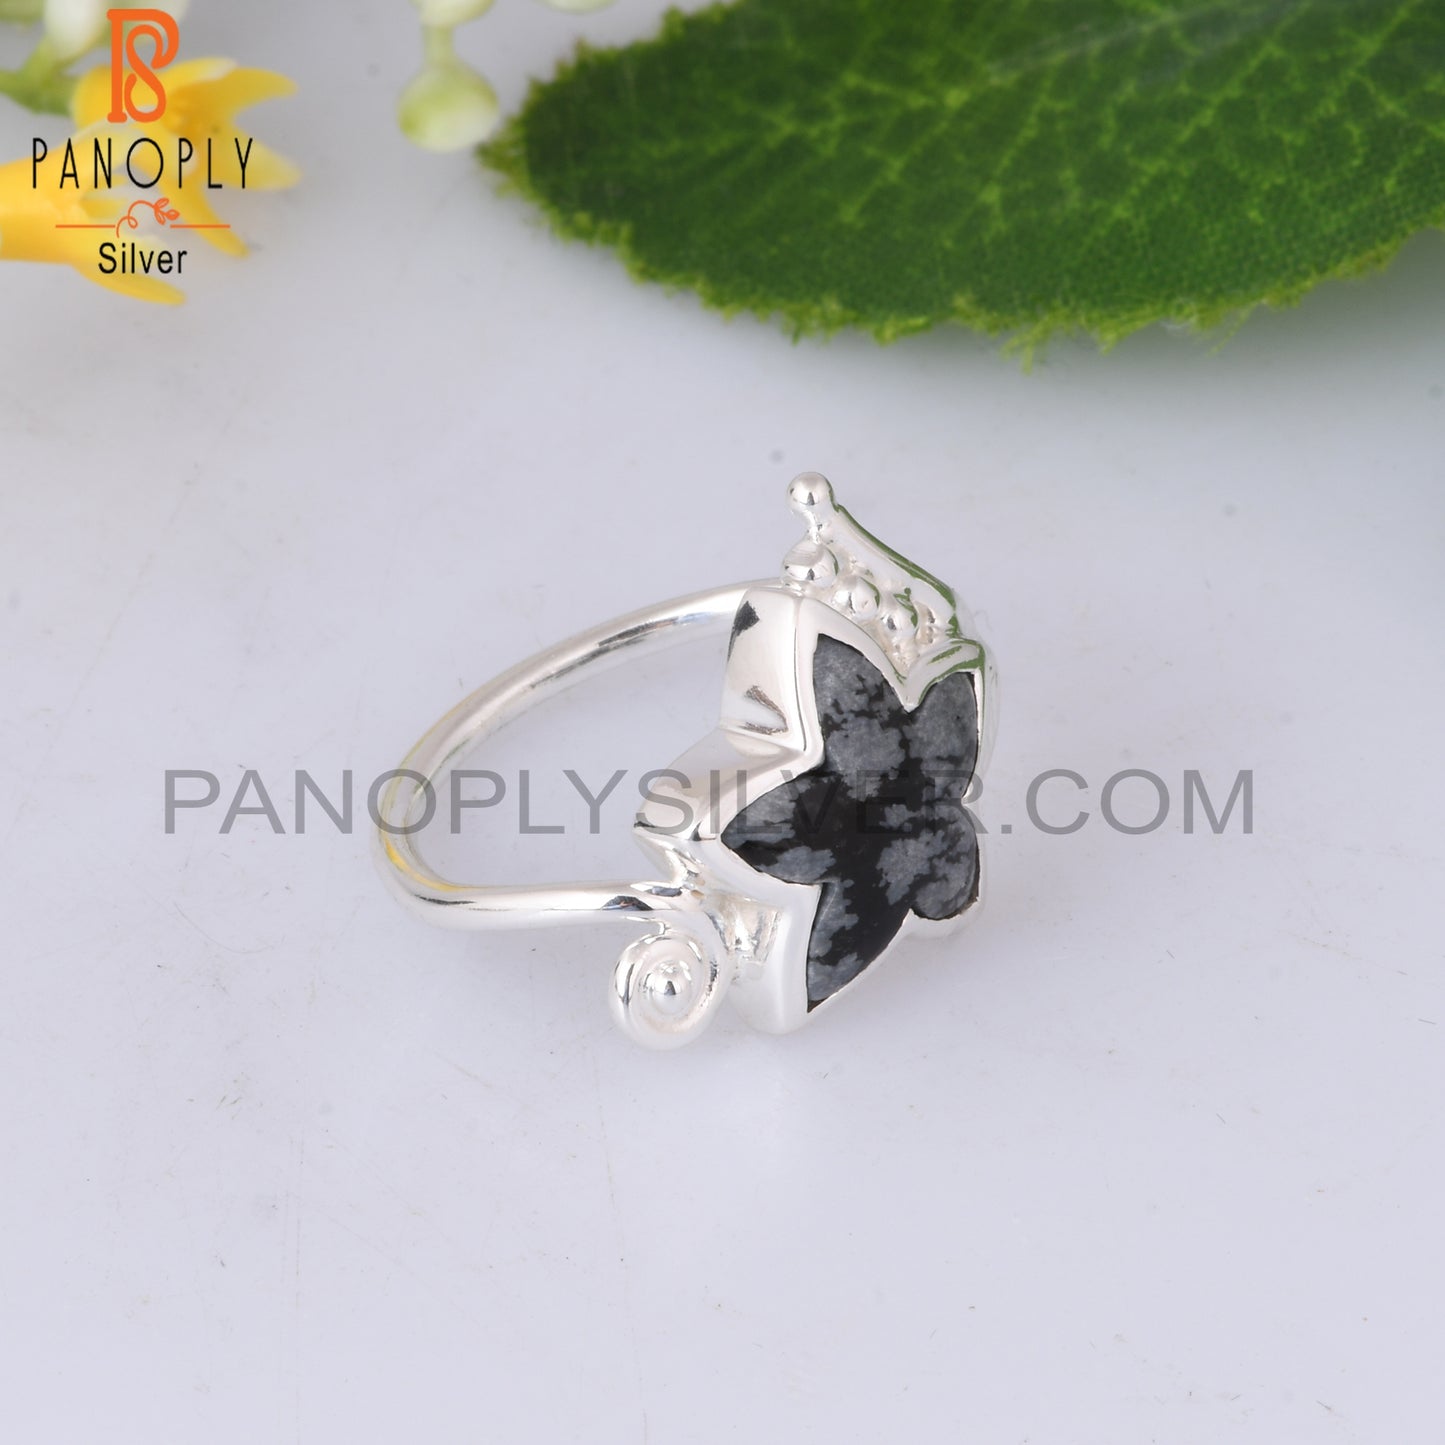 Branch Flower Snowflake Obsidian 925 Sterling Silver Ring